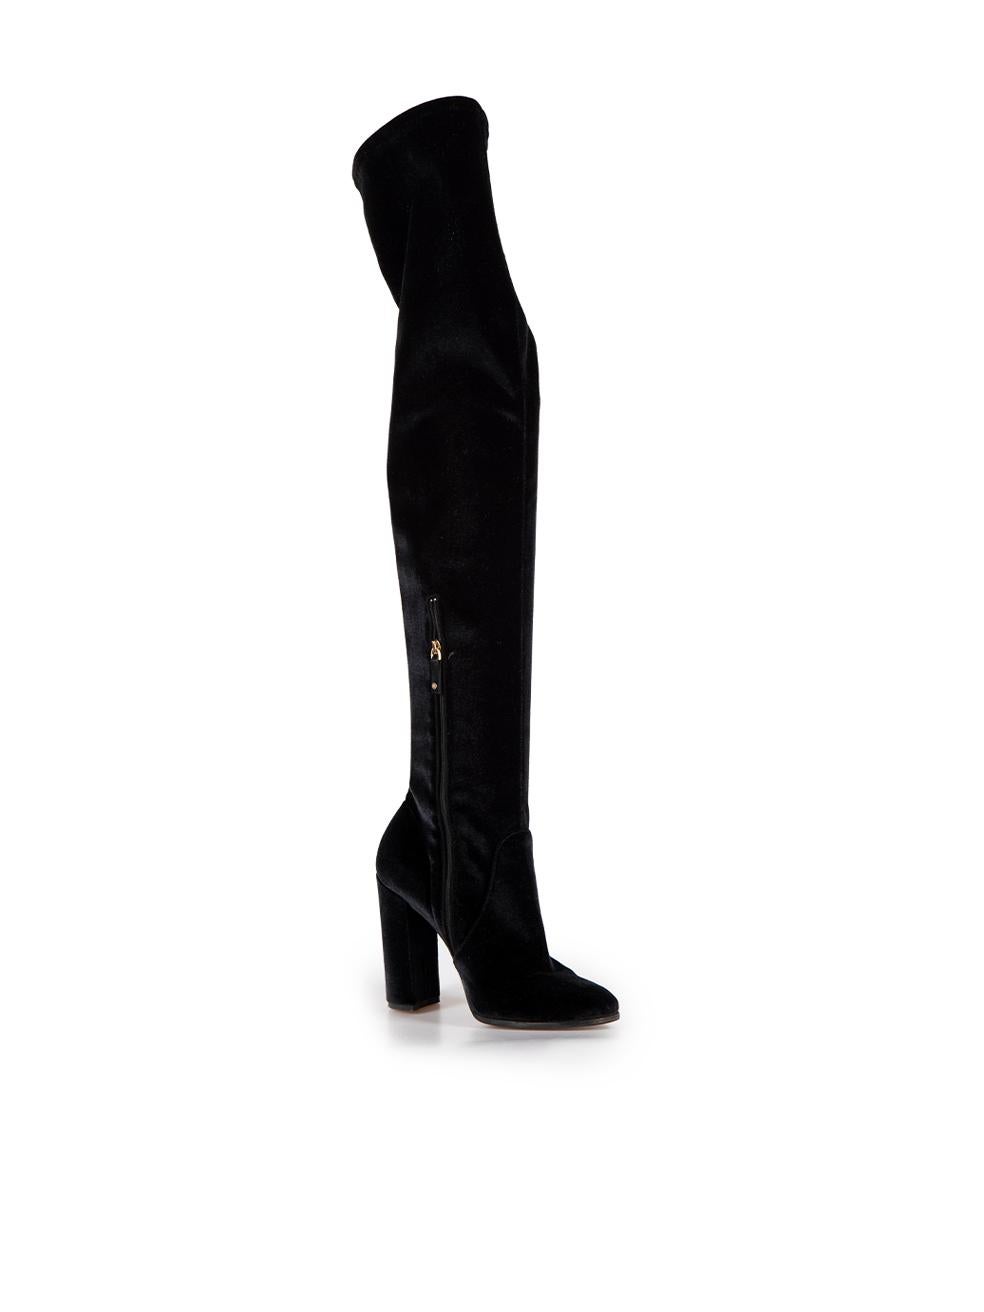 CONDITION is Very good. Minimal wear to boots is evident. Minimal wear to the right boot heel with abrasions to the velvet on this used Ermanno Scervino designer resale item.
 
 Details
 Black
 Velvet
 Thigh high boots
 Round toe
 Zip fastening
